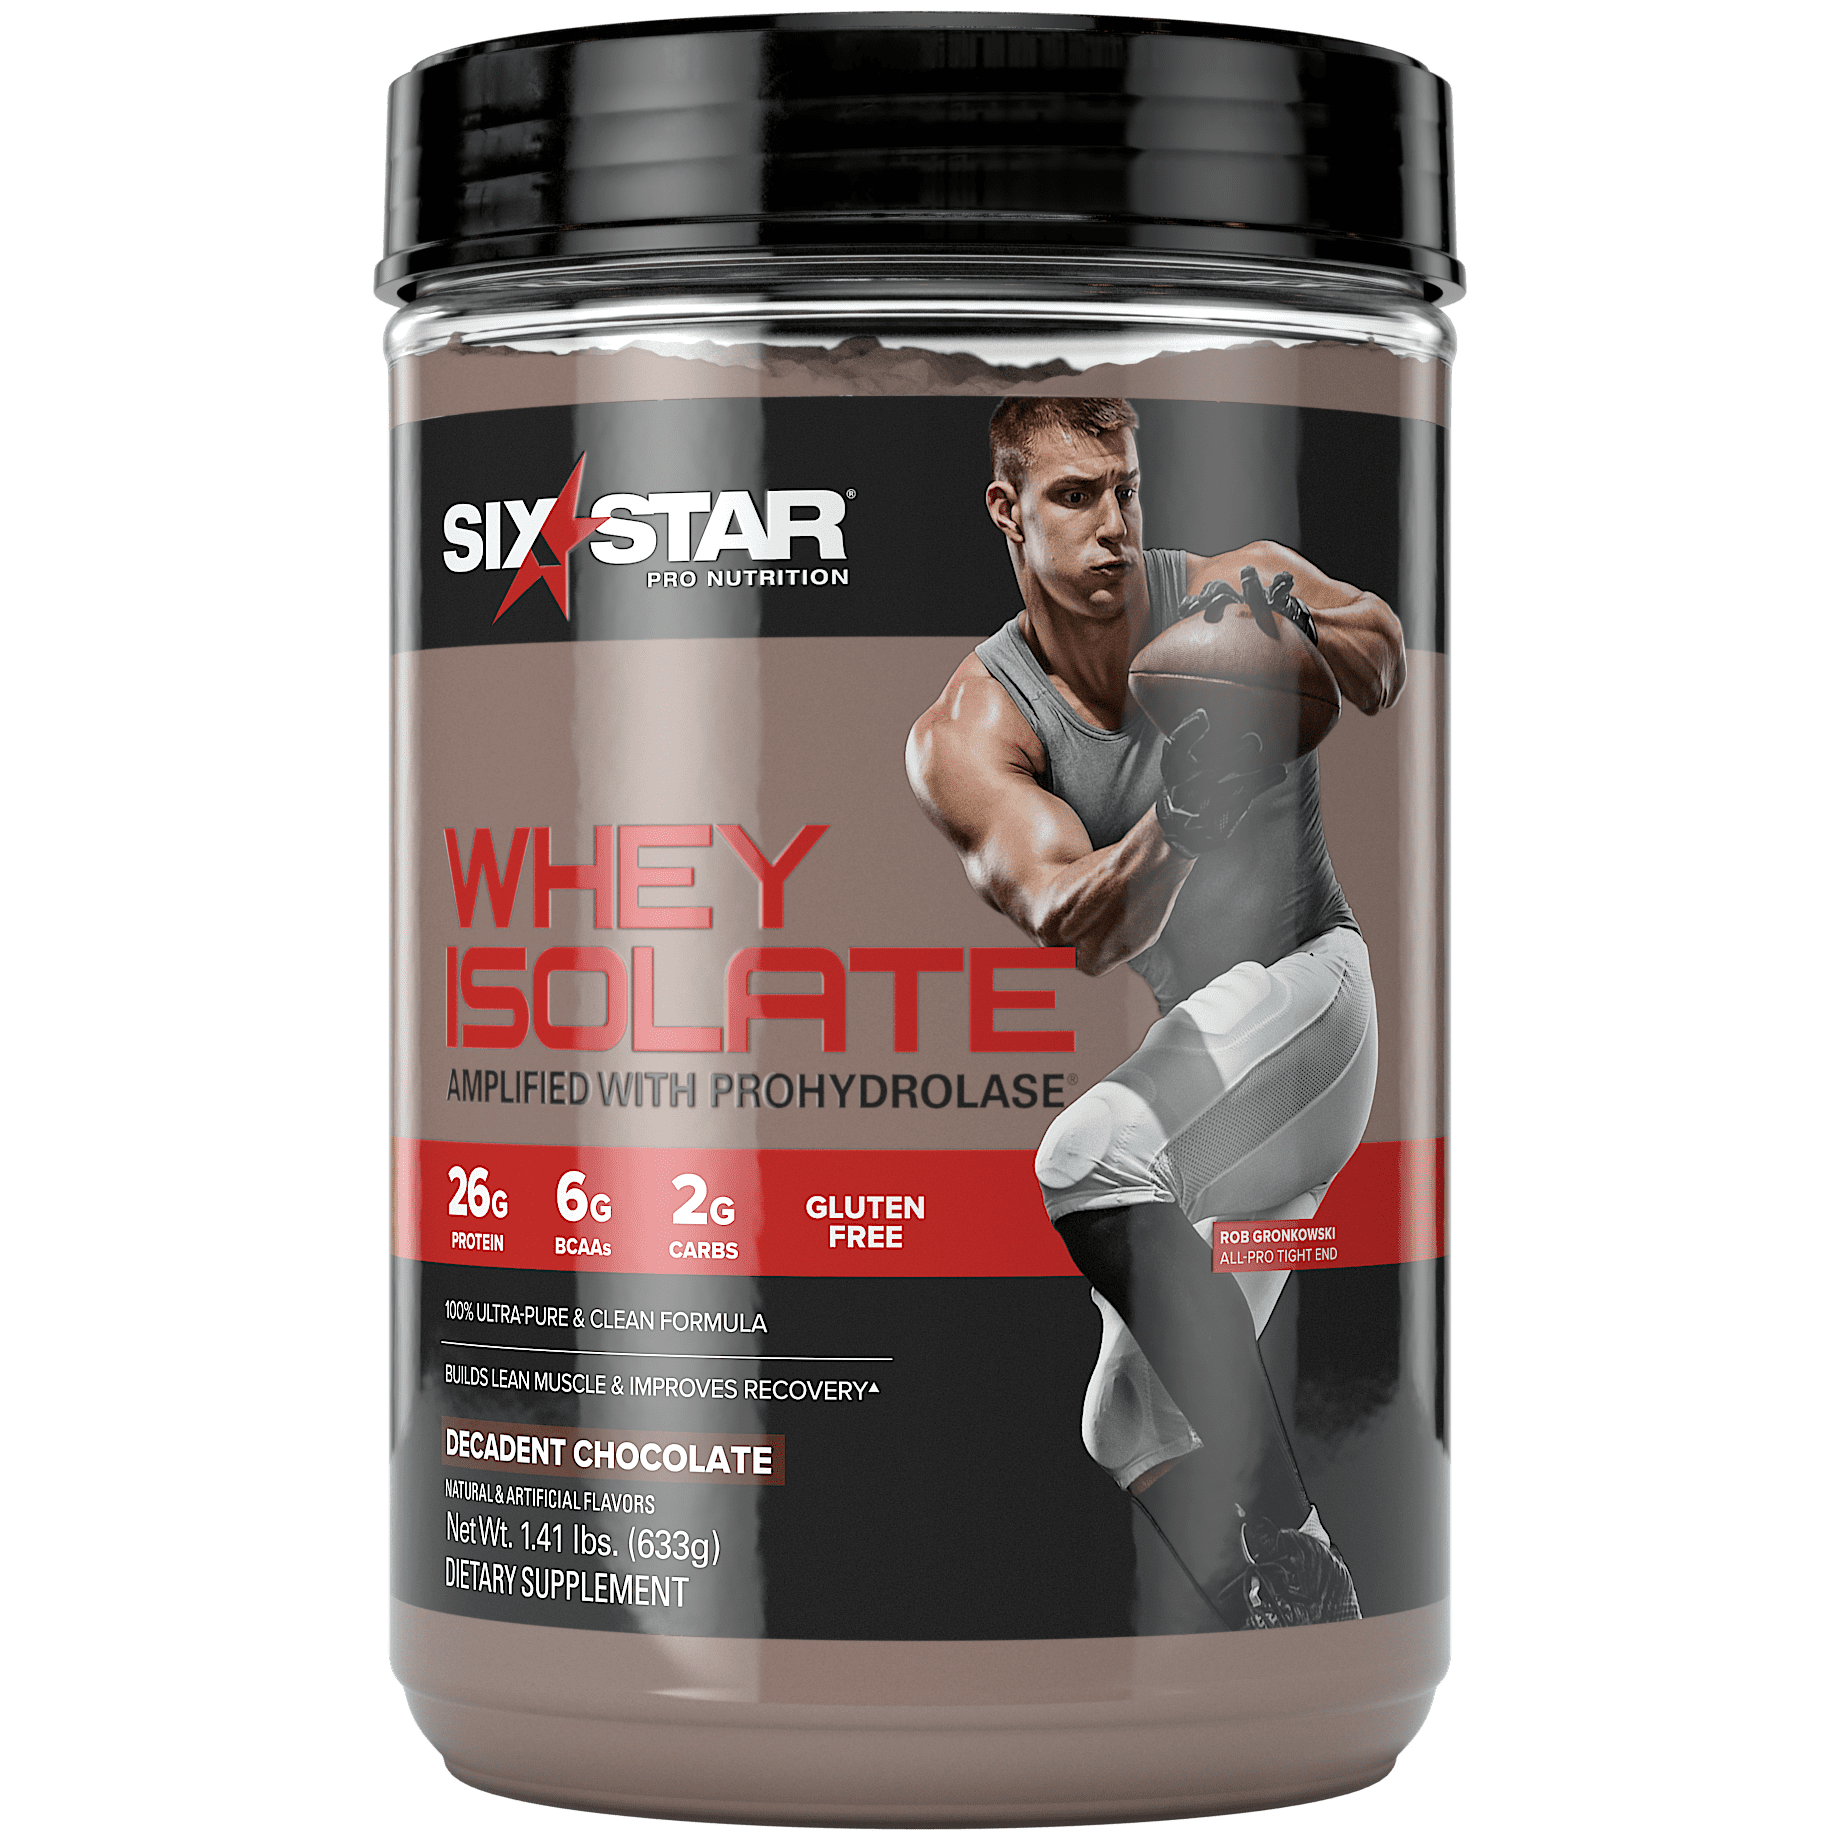 Six Star Pro Nutrition 100% Whey Isolate Protein Powder, Decadent  Chocolate, 26g Protein, 1.4lbs